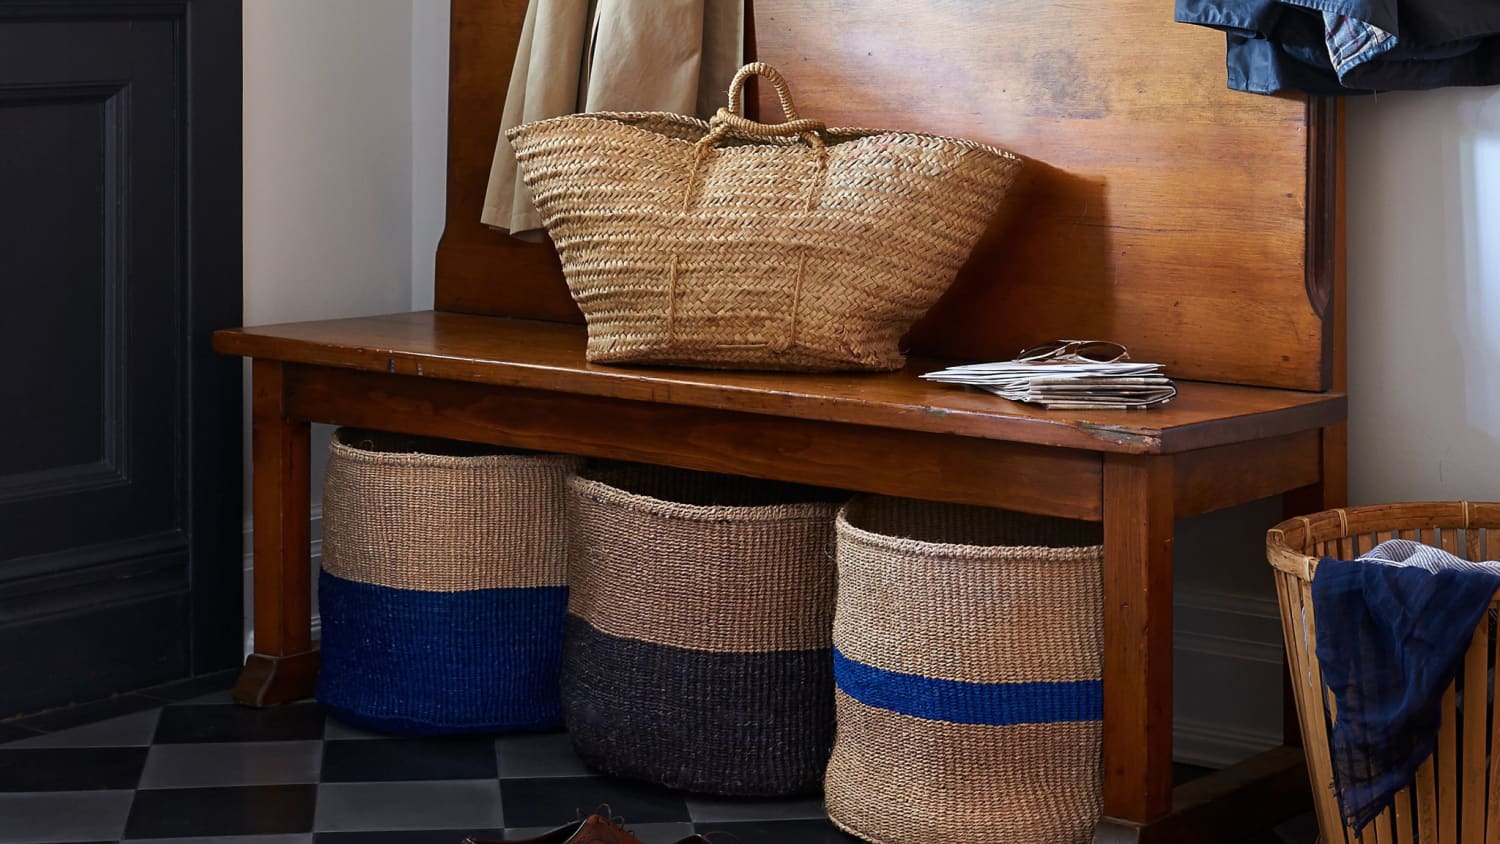 5 Favorites: Leather Baskets Too Pretty To Hide - Remodelista